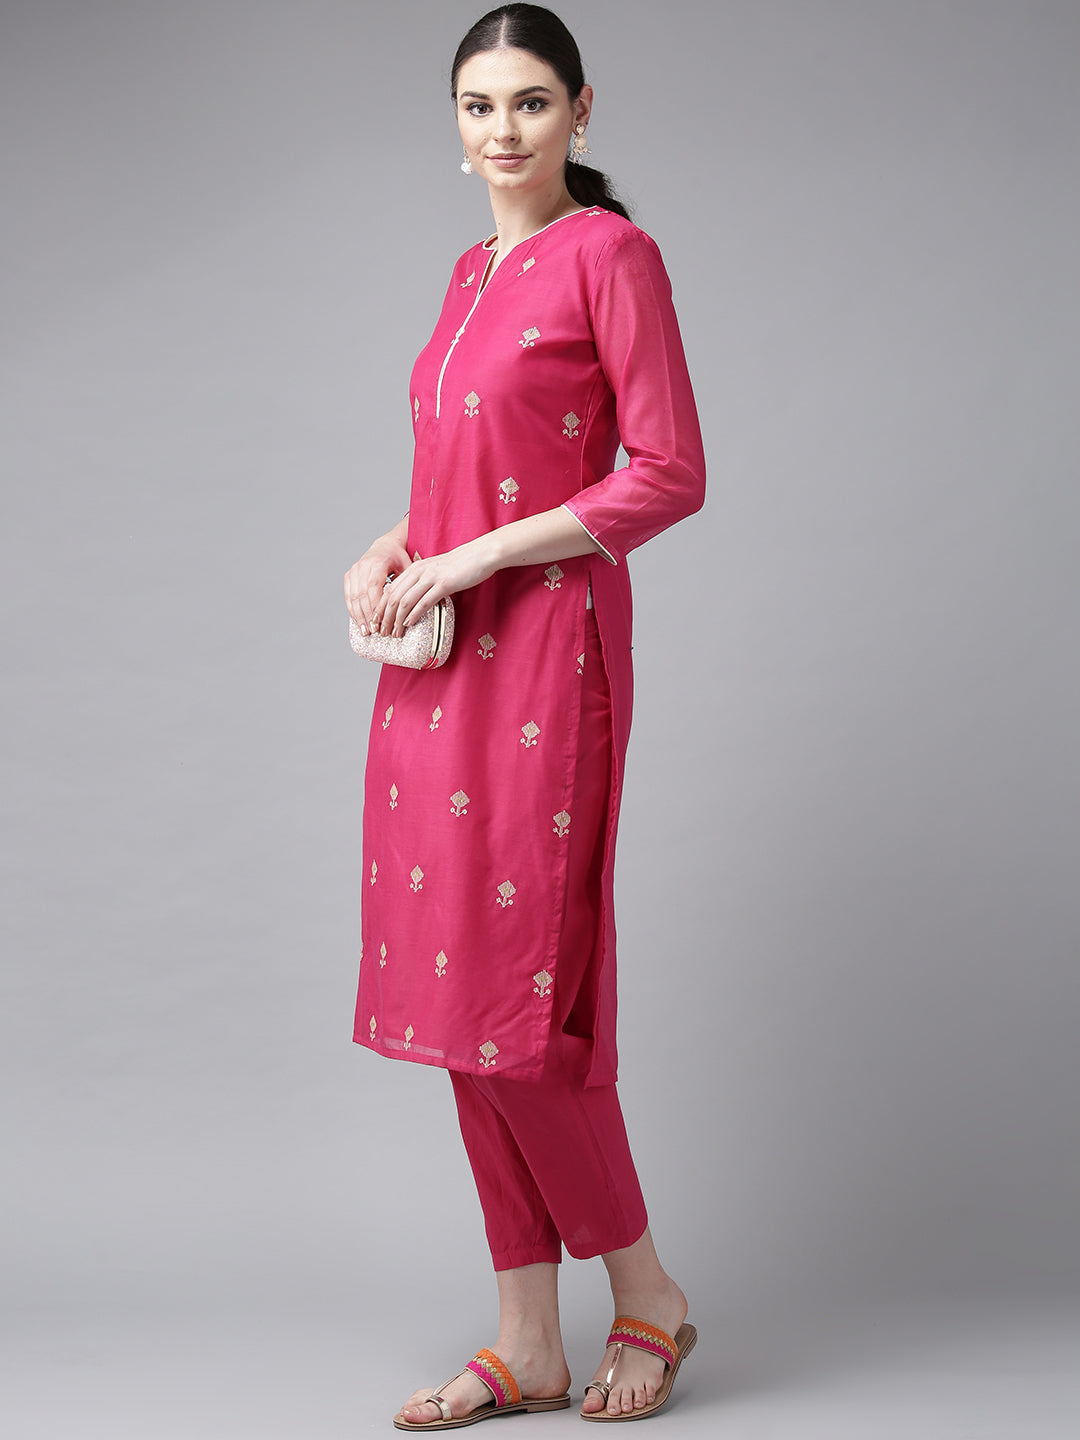 Bhama Couture Women Pink & Cream-Coloured Embroidered Kurta with Trousers